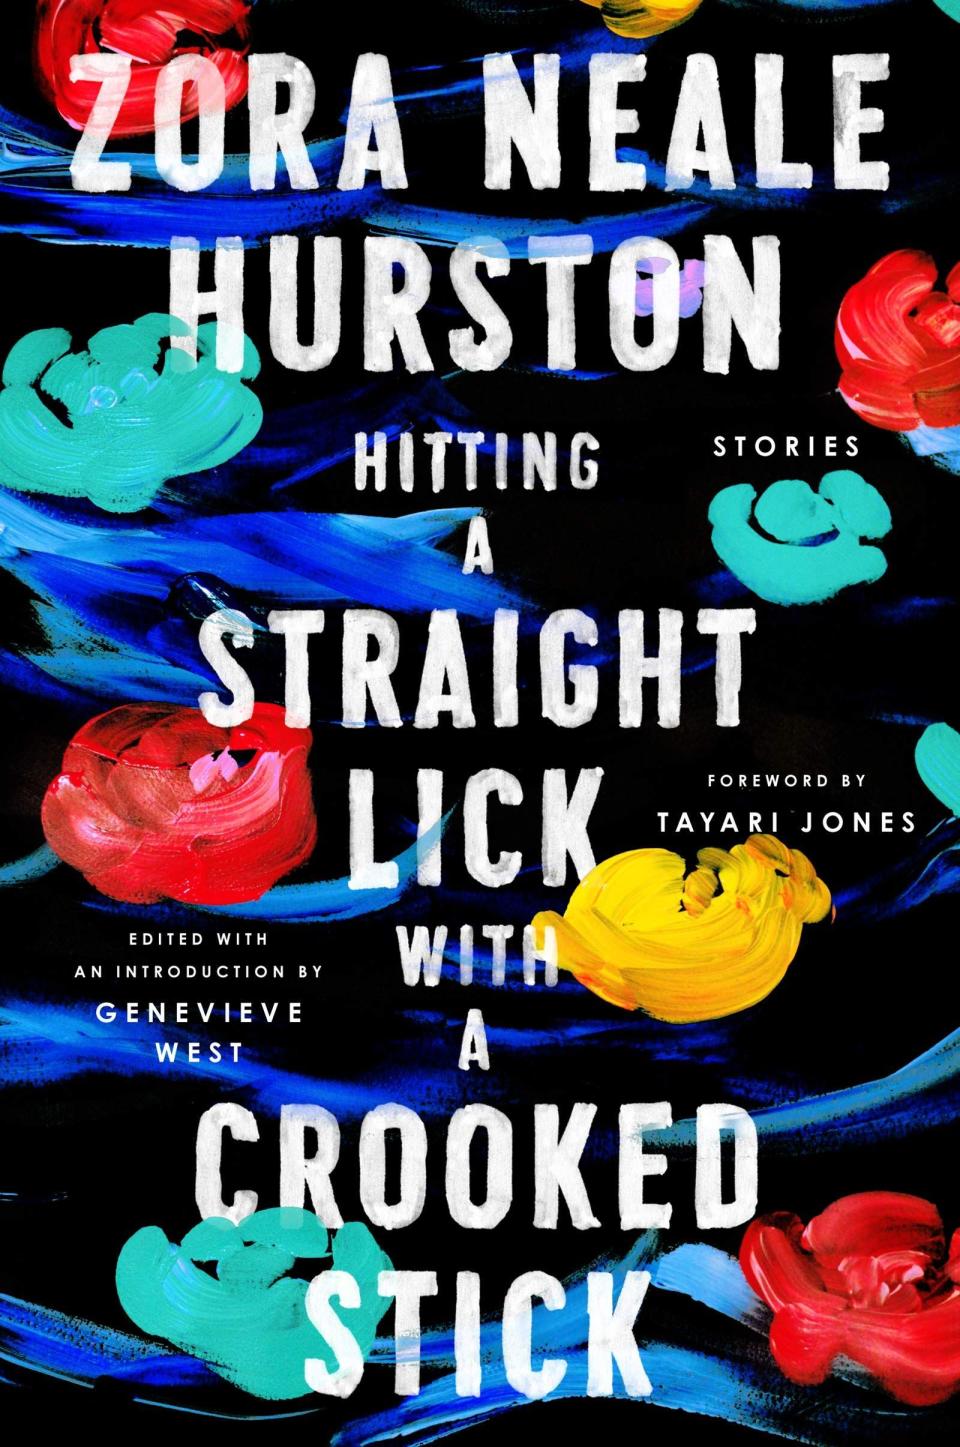 54) 'Hitting a Straight Lick with a Crooked Stick' by Zora Neale Hurston